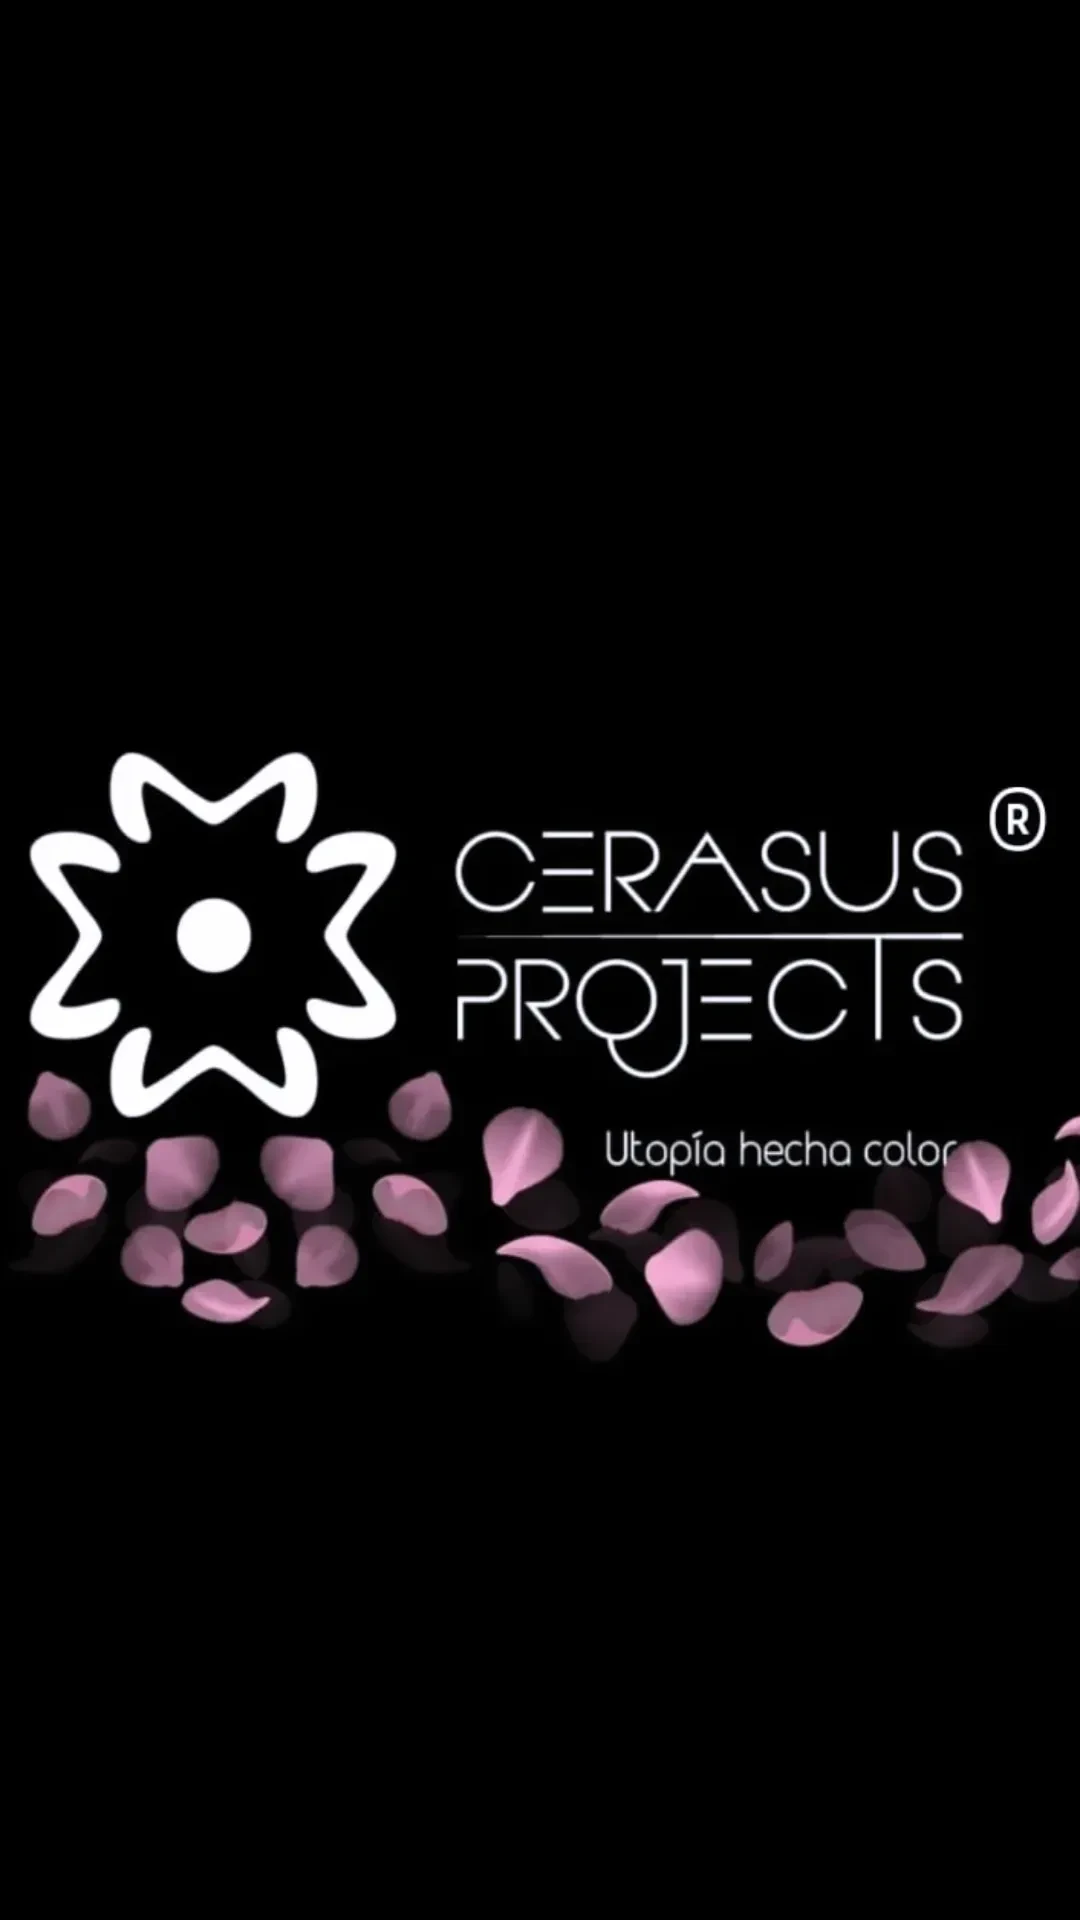 Cerasus projects spa 